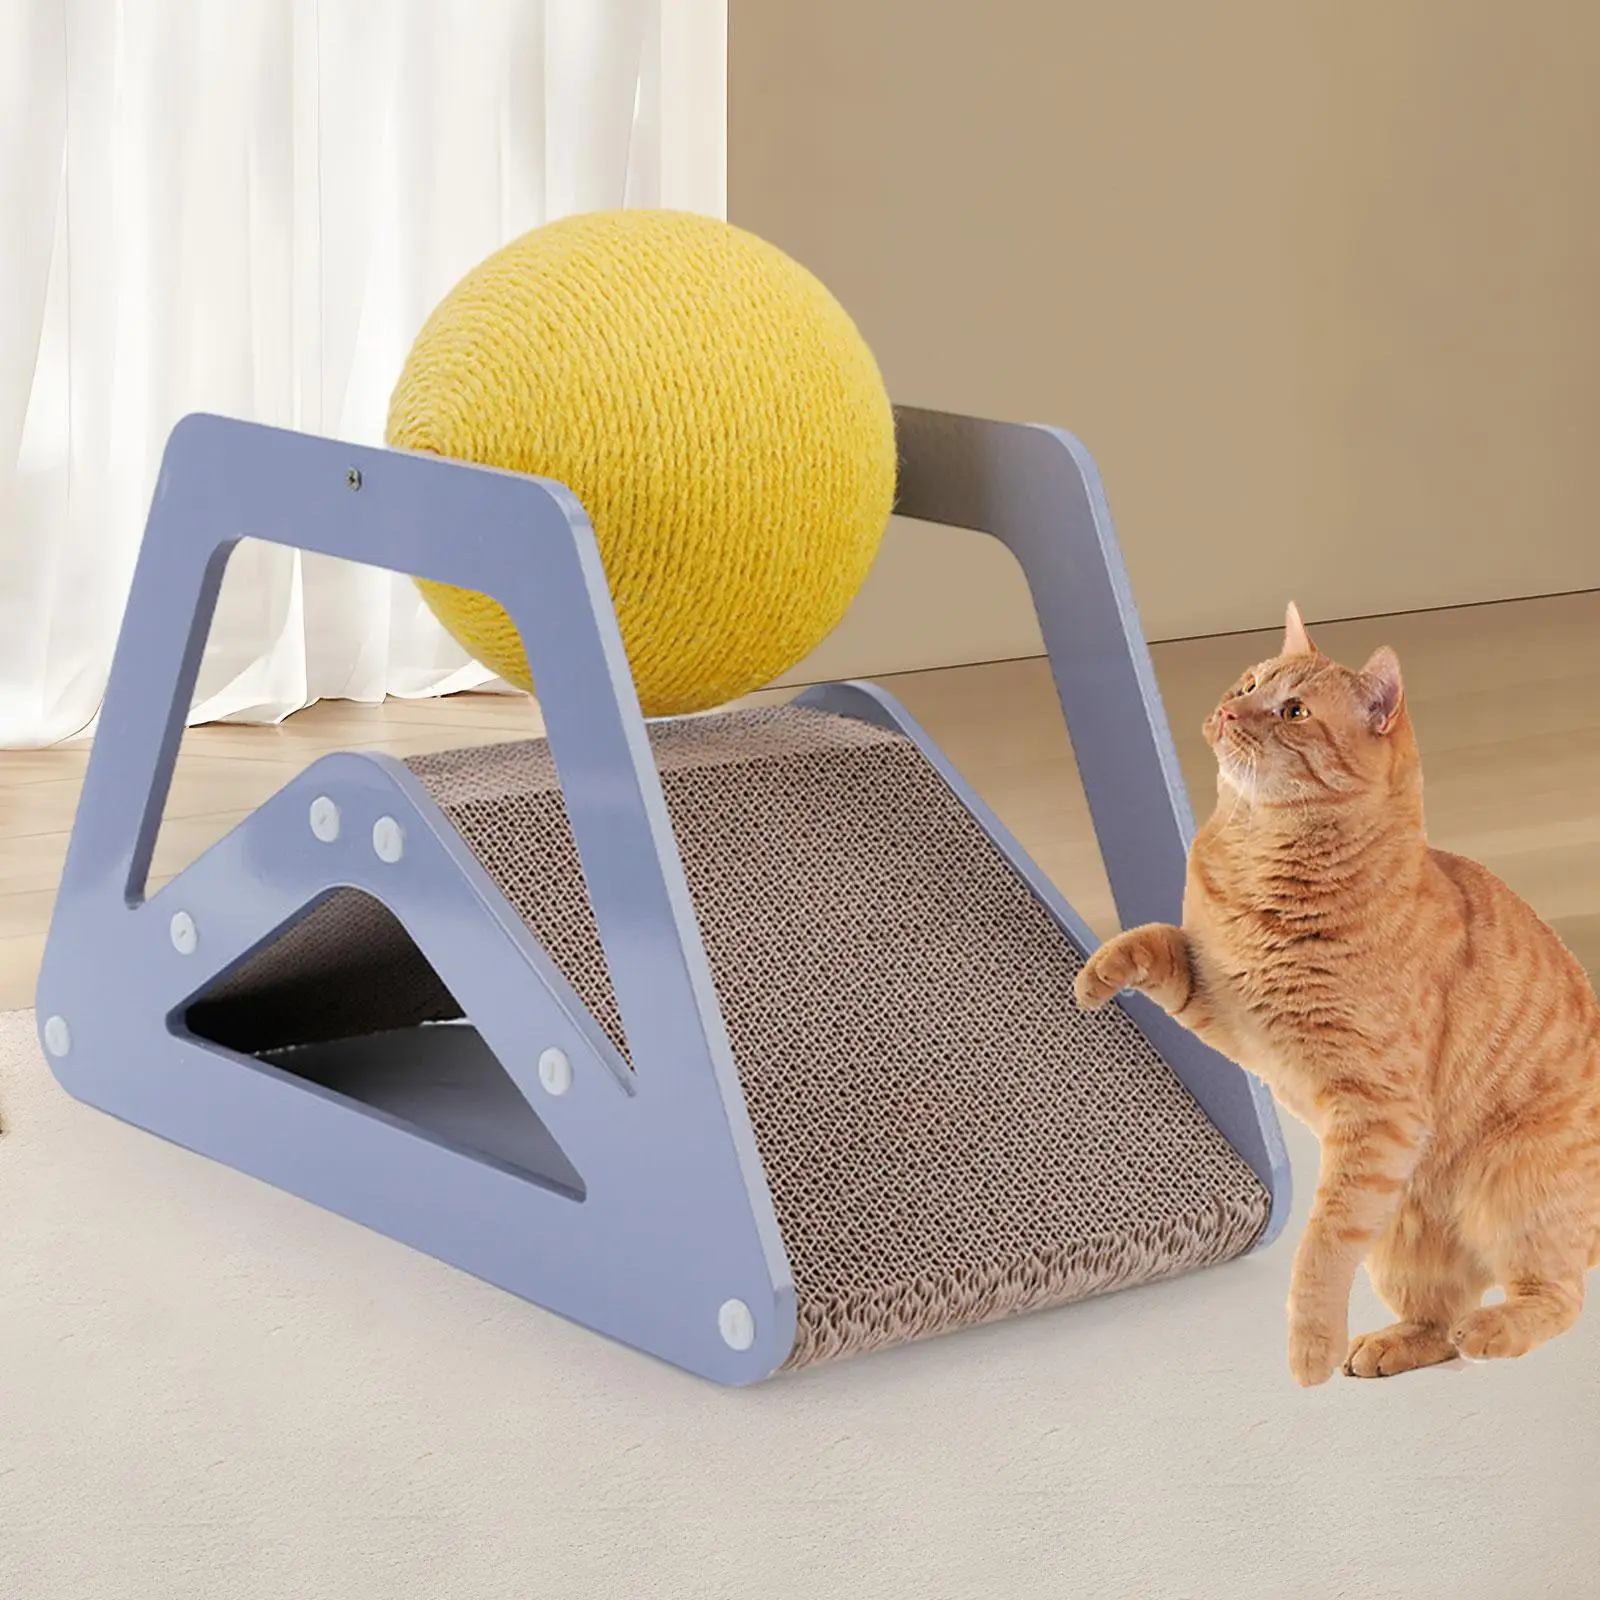 Sisal Cat Scratching Ball Lounge Bed Pet Supplies Sisal Cat Scratch Post for Sleeping Playing Rest Small Medium Large Cats Kitty